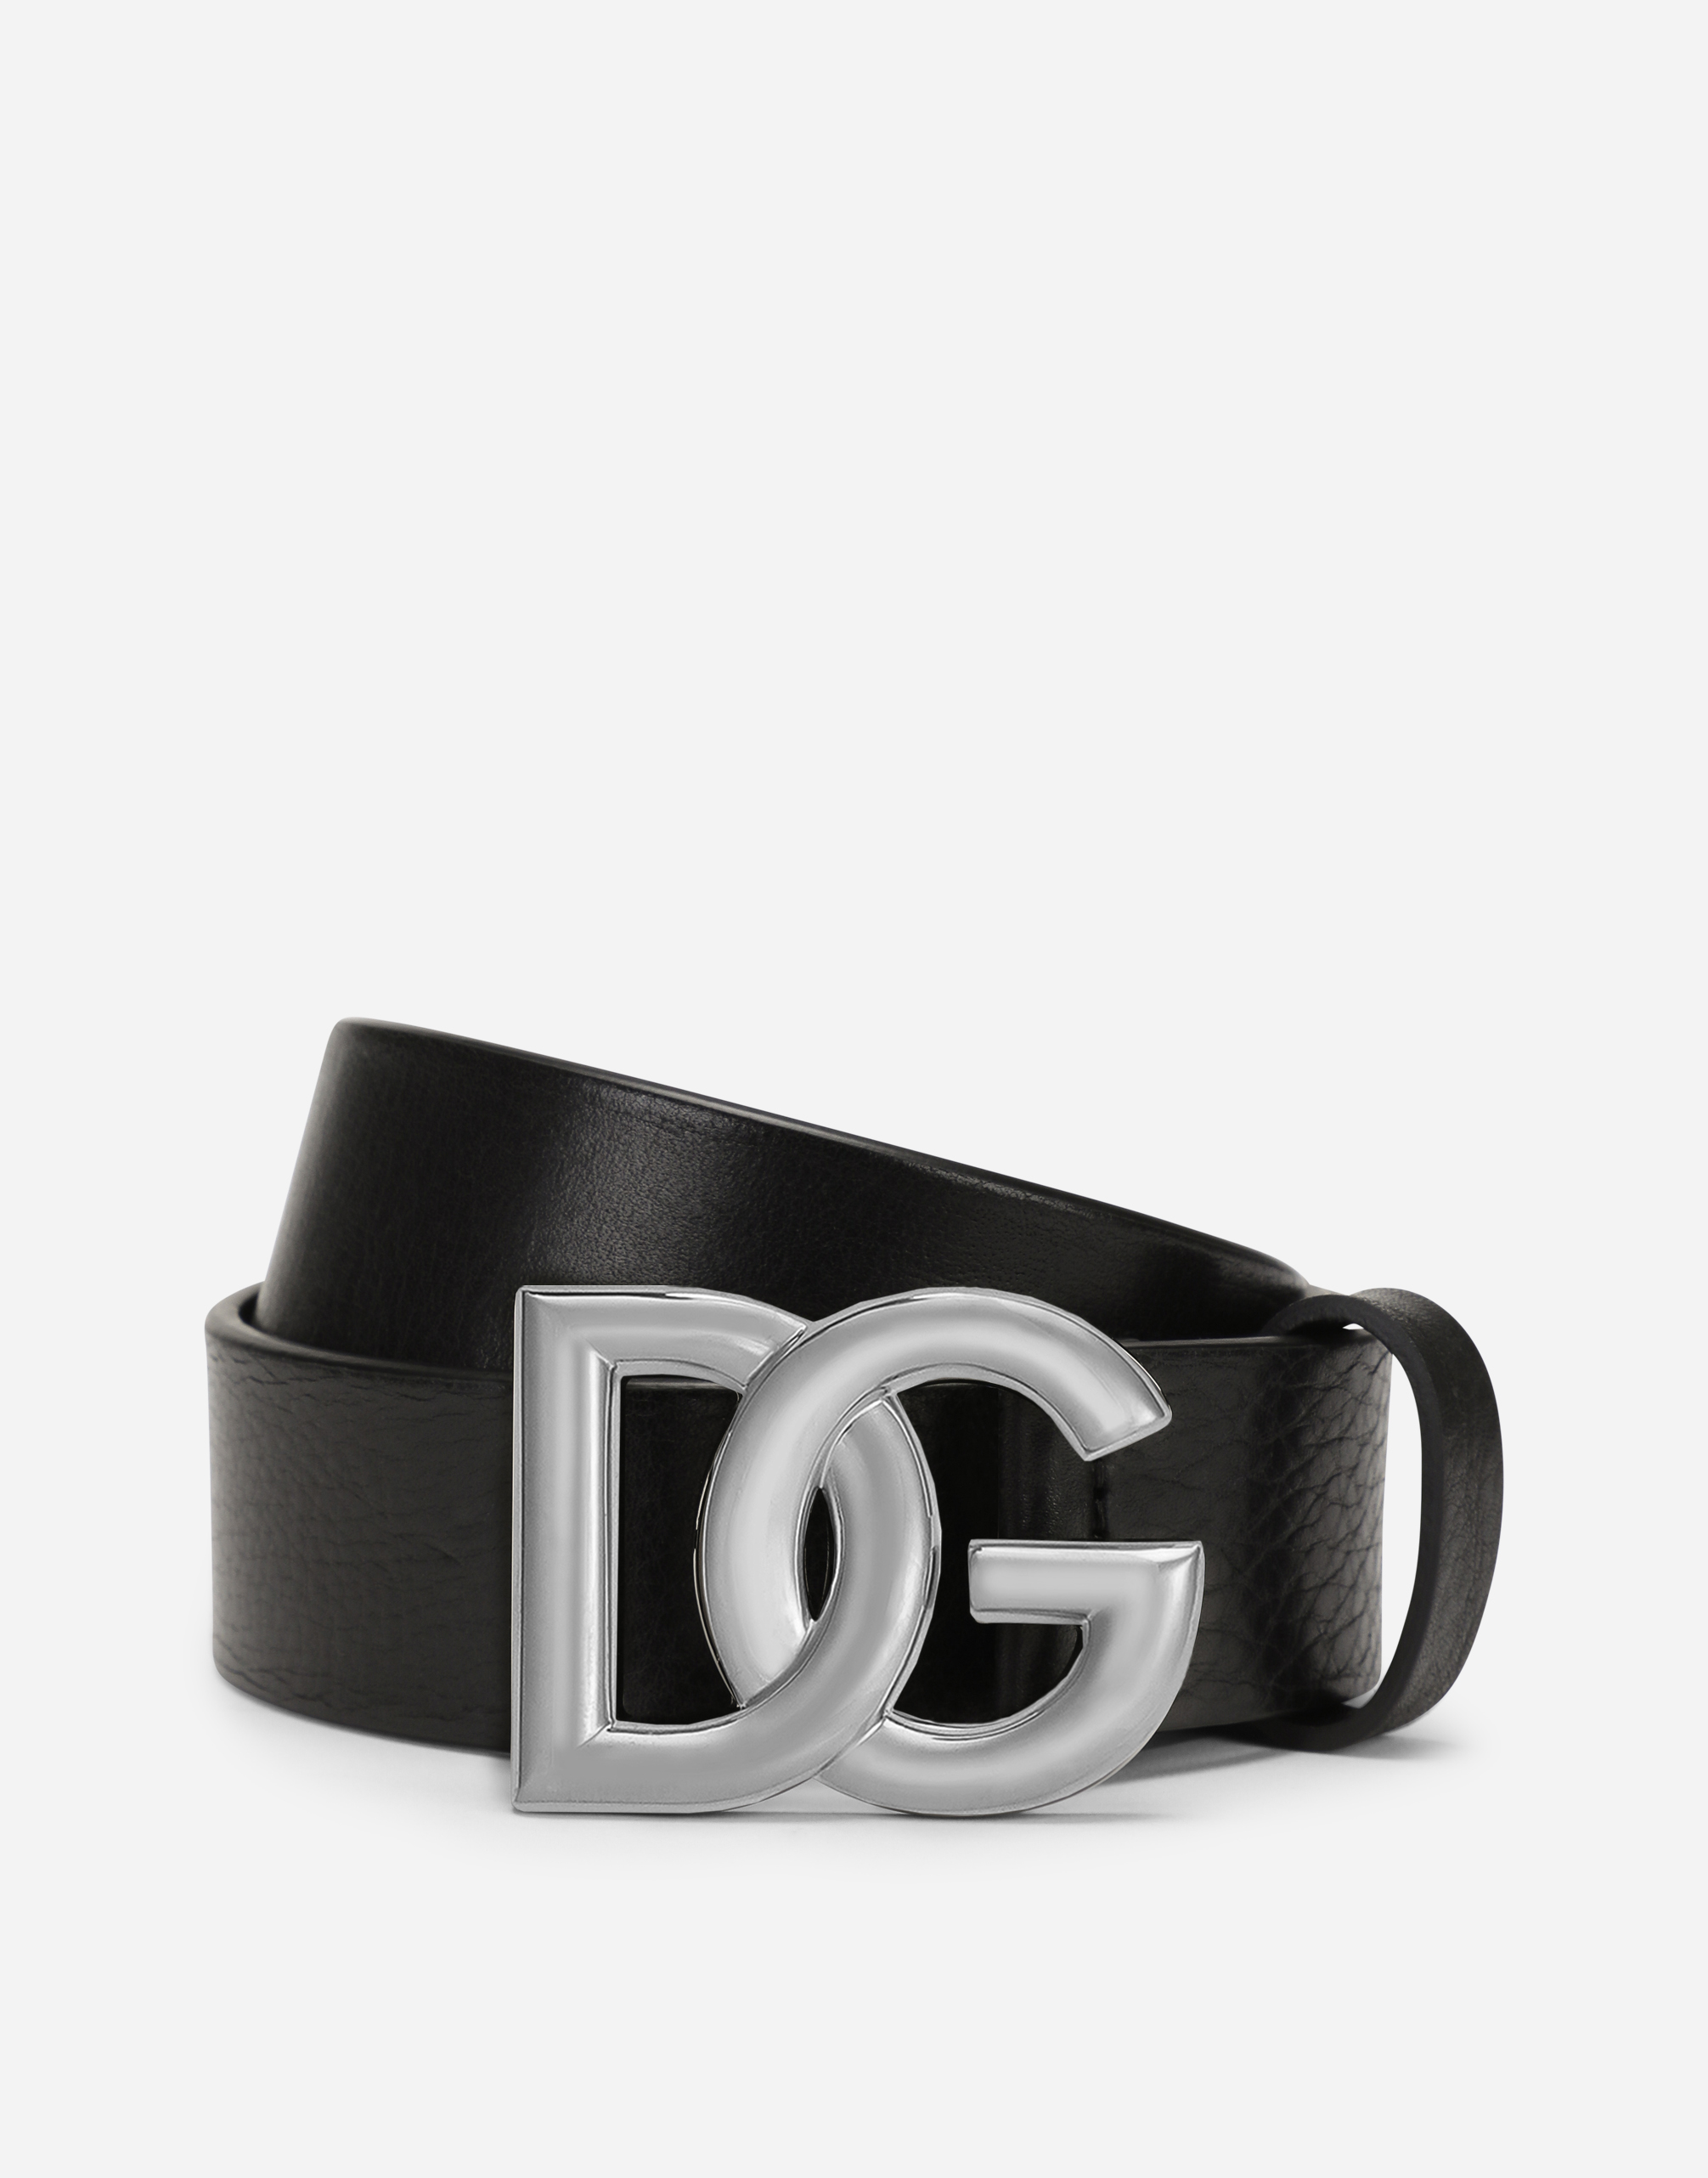 Tumbled leather belt with crossover DG logo buckle in Black